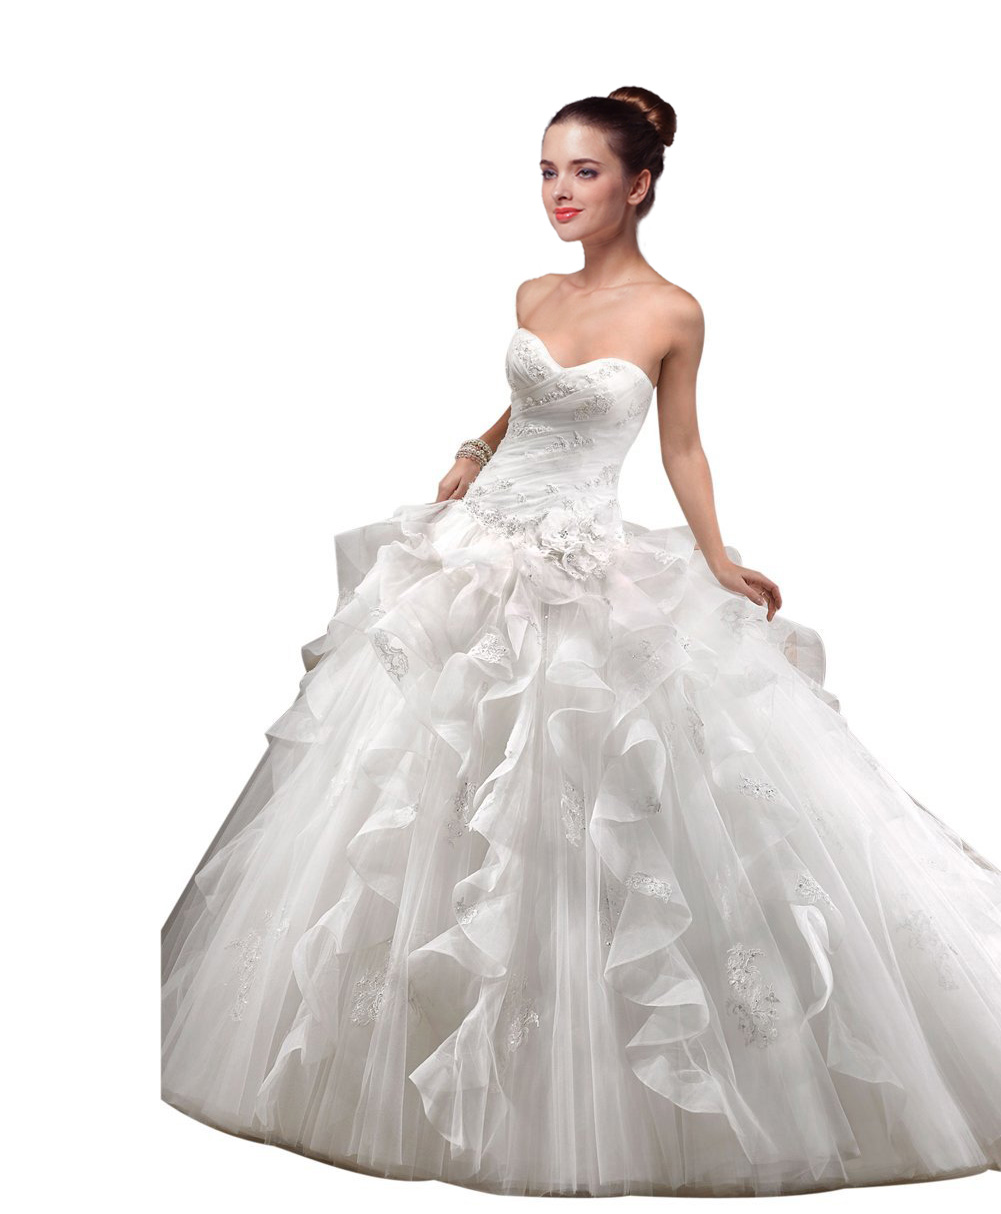 Women's Luxury Tull Over Satin Ball Gown With Tiered Organza Wed - Click Image to Close